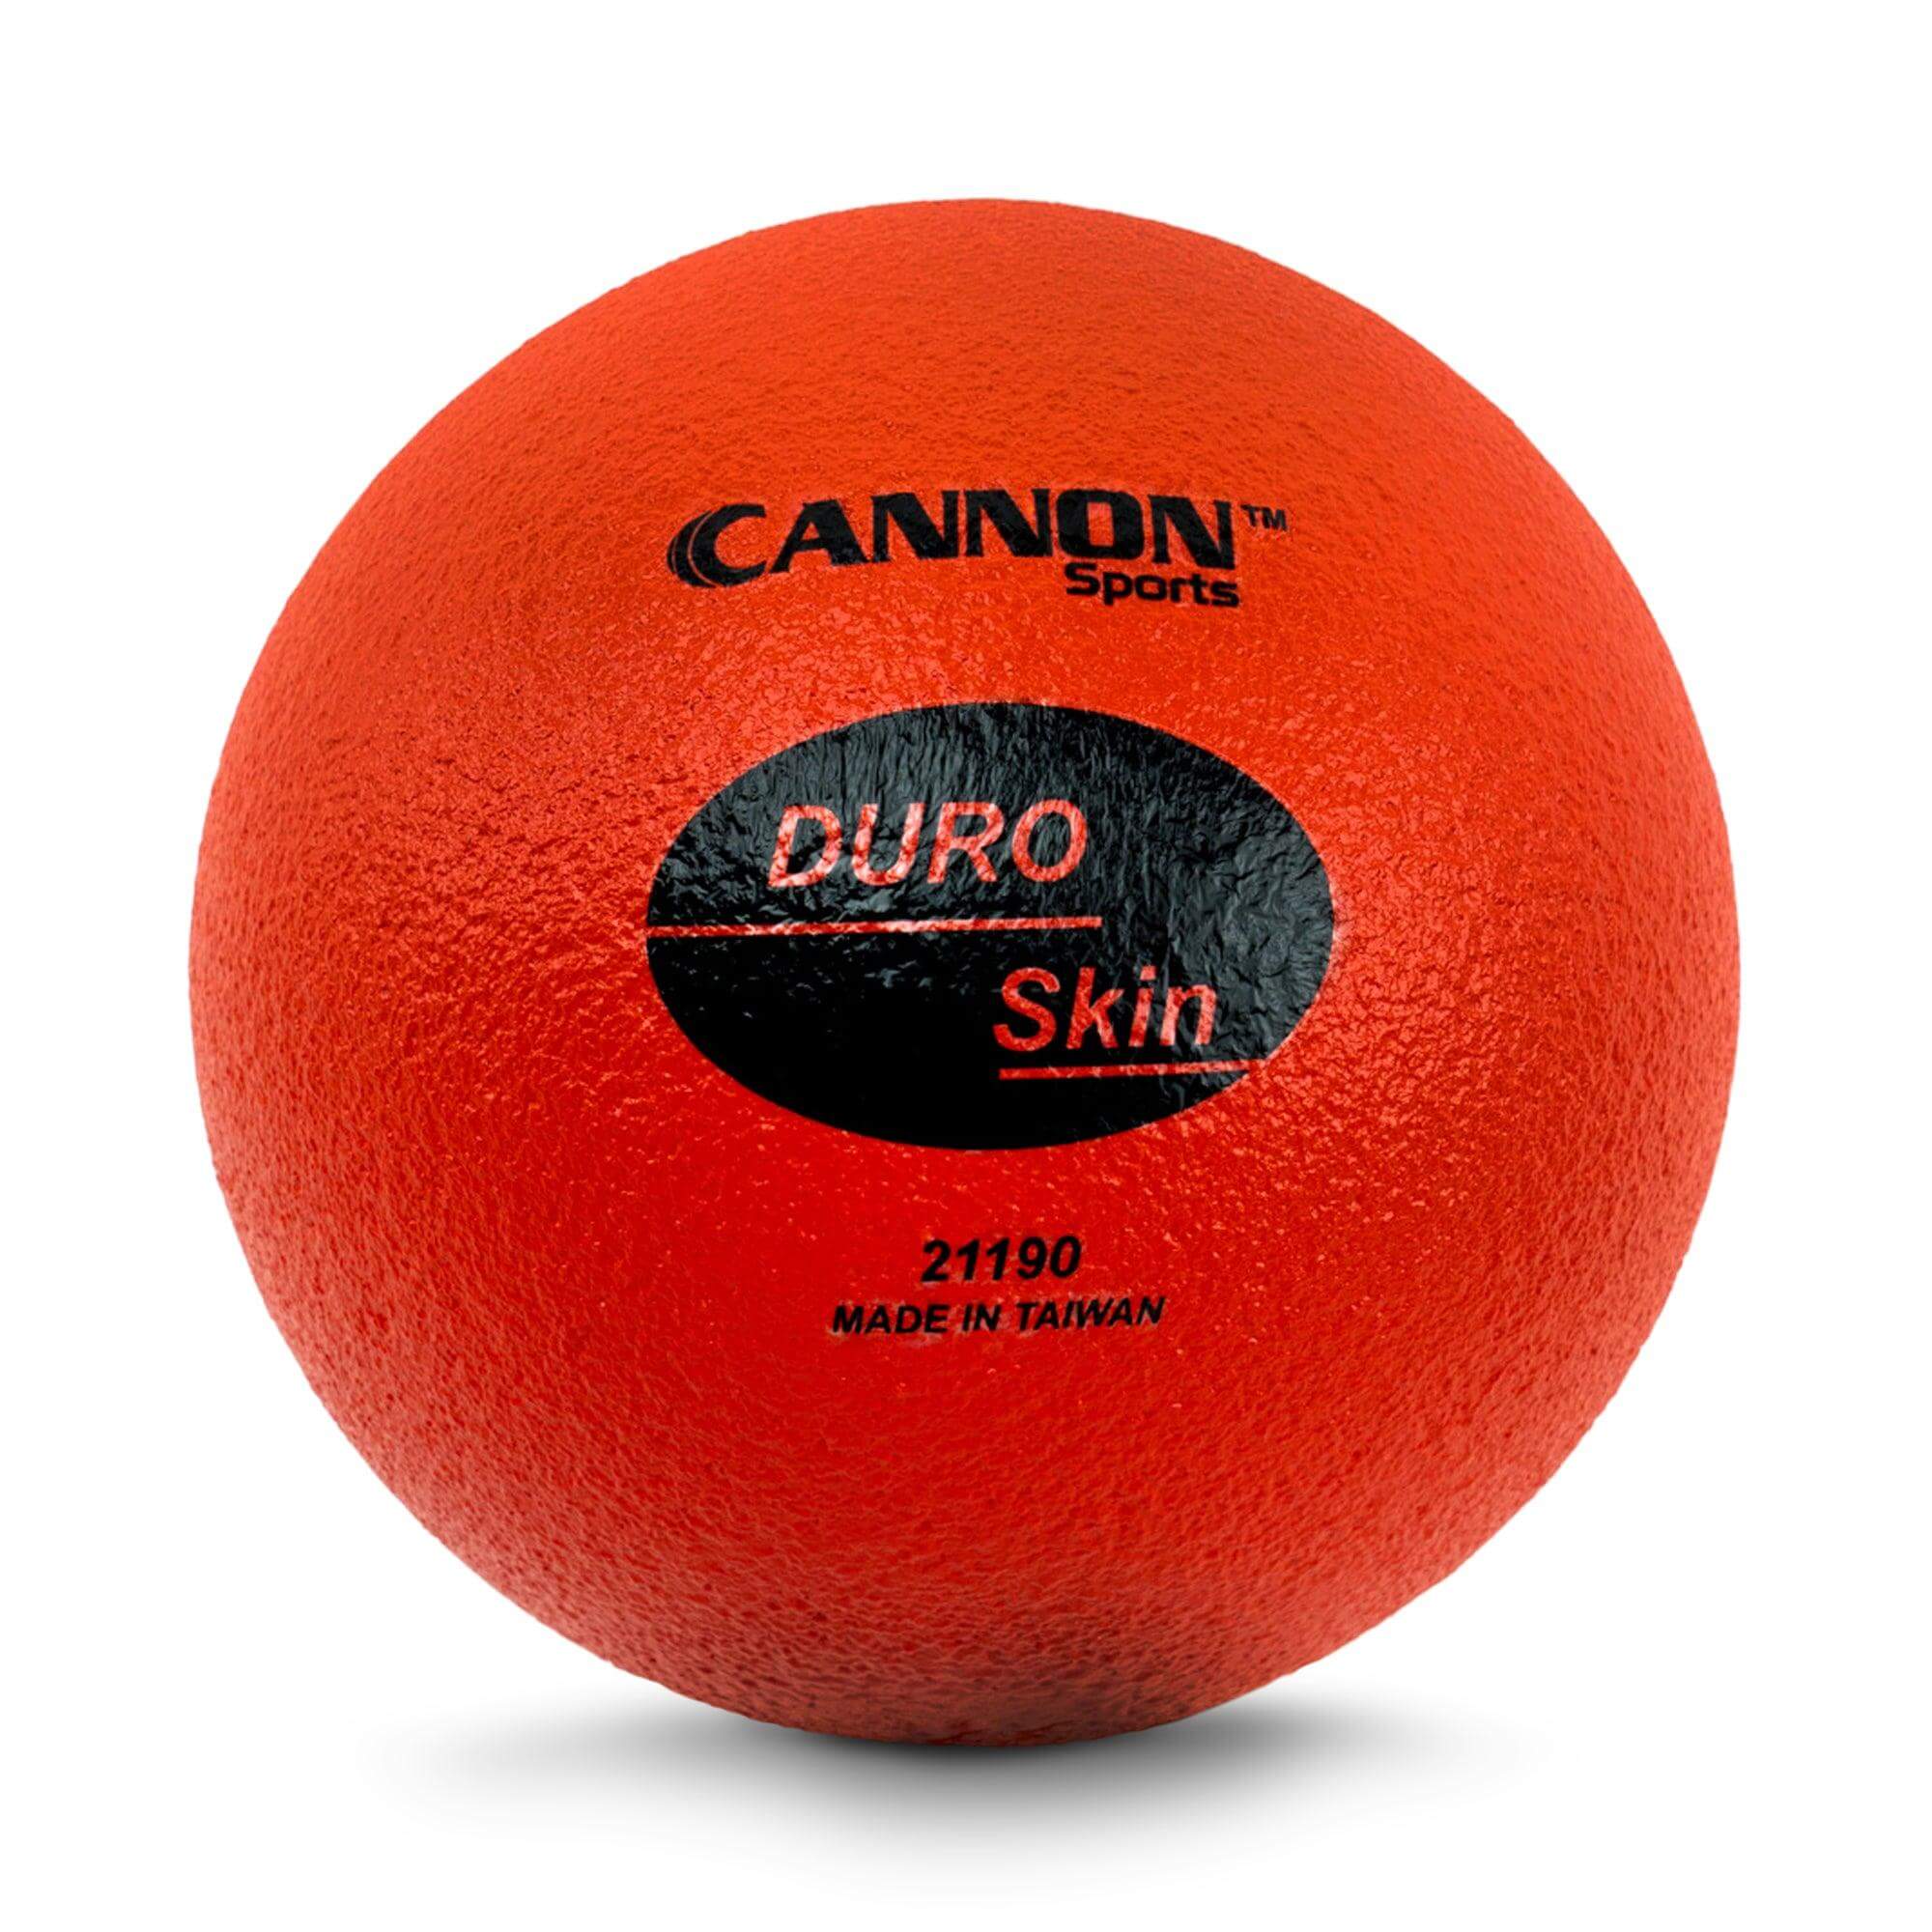 Cannon Sports 21190 Duro Skin Foam Playground Ball for Outdoor Activities, Dodgeball, Handball, & Kickball (Red, 6-Inch) - Cannon Sports